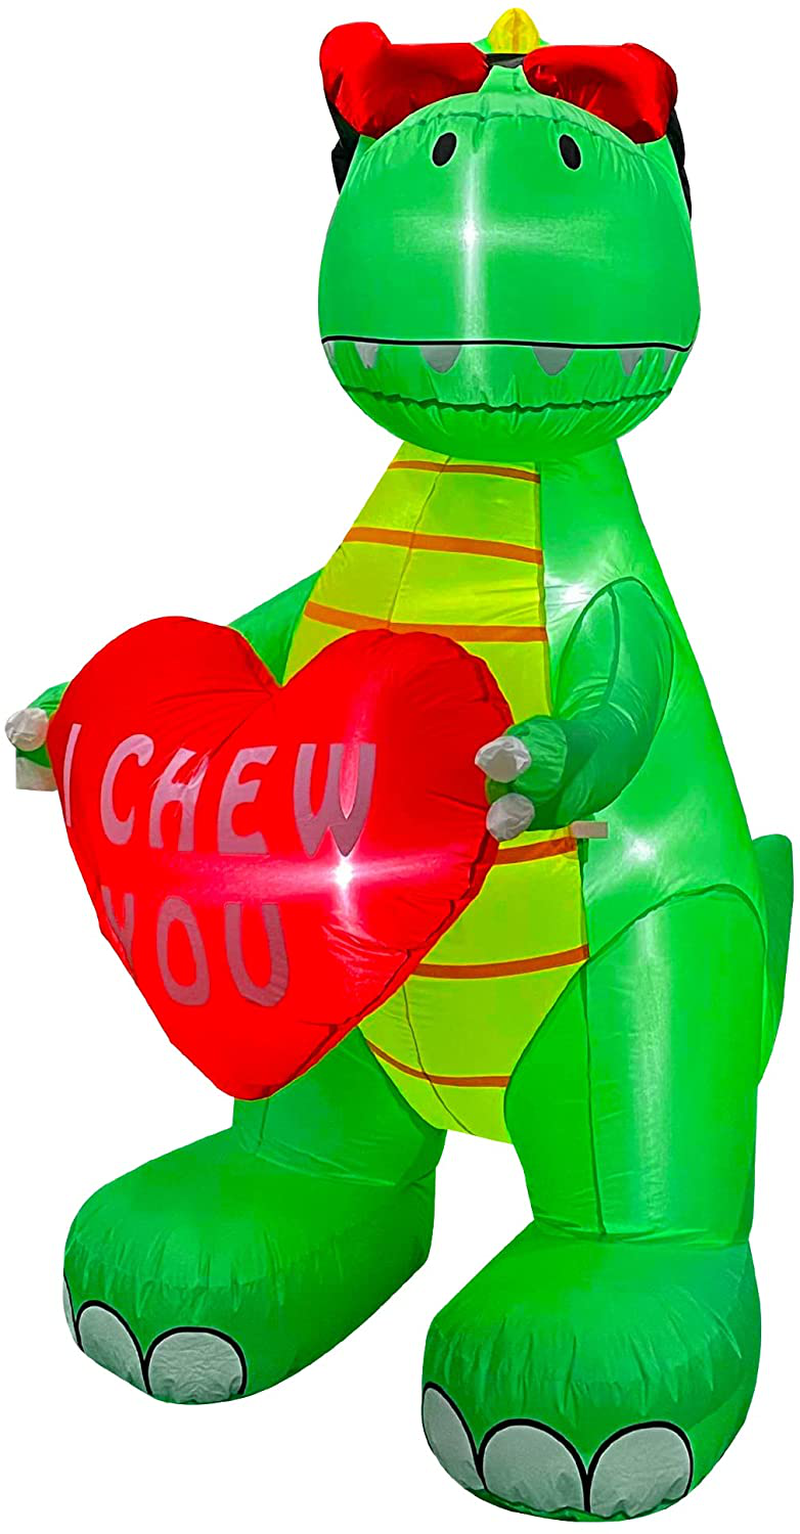 SEASONBLOW 6 FT Inflatable Valentine'S Day Dinosaur with Heart LED Lighted Decoration for Birthday Wedding Yard Lawn Garden Indoor Outdoor Decor